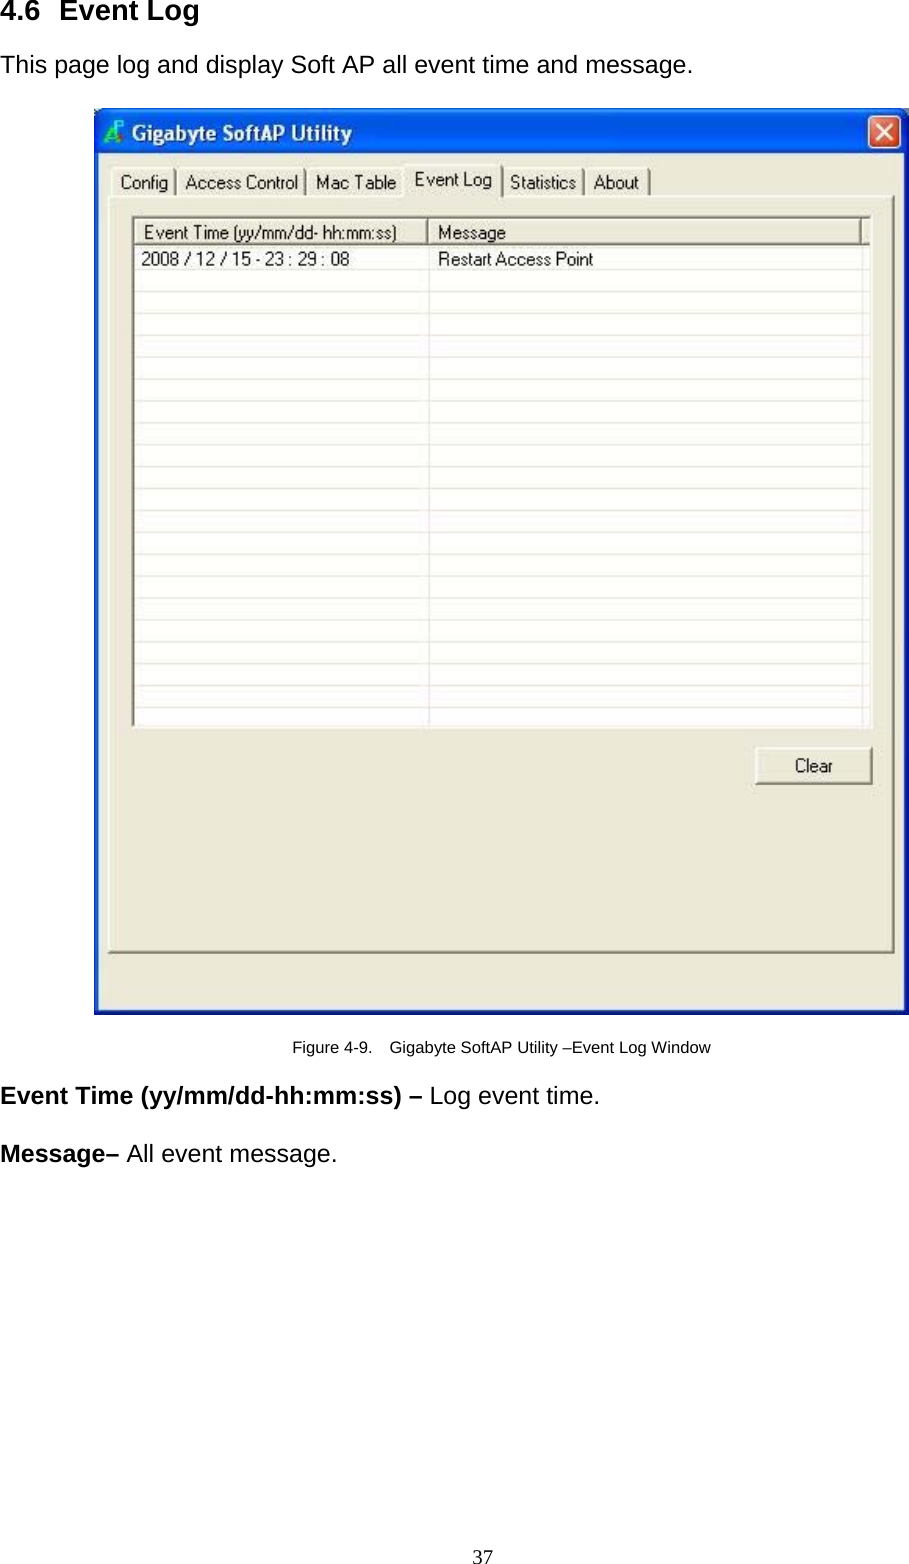 37   4.6 Event Log  This page log and display Soft AP all event time and message.    Figure 4-9.    Gigabyte SoftAP Utility –Event Log Window  Event Time (yy/mm/dd-hh:mm:ss) – Log event time.  Message– All event message.   